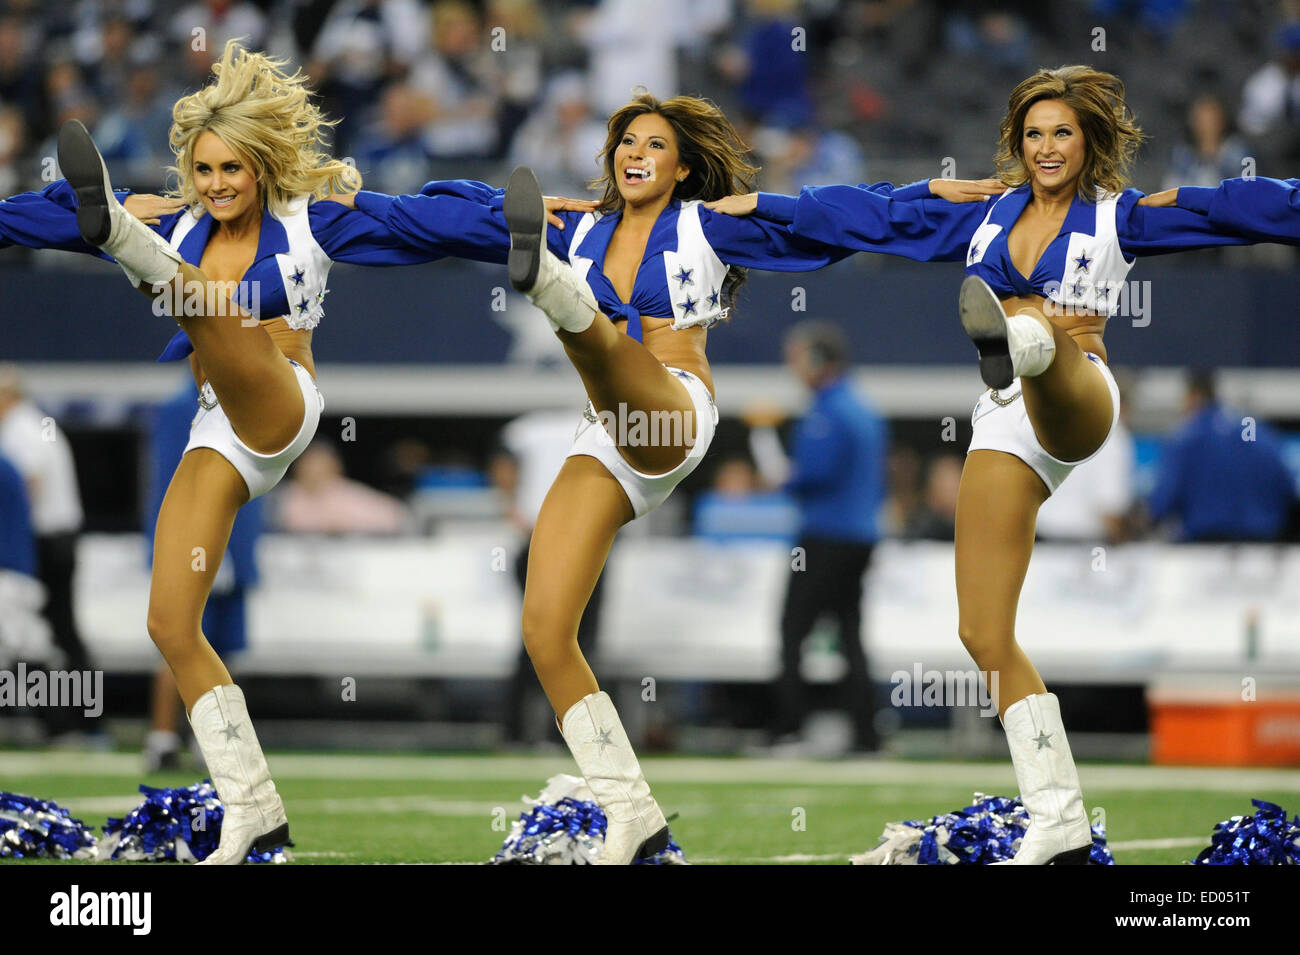 December 21, 2014: The Dallas Cowboys Cheerleaders perform during an NFL football game between the Indianapolis Colts and the Dallas Cowboys at AT&T Stadium in Arlington, TX Dallas defeated Indianapolis 42-7 to clinch the NFC East Championship Stock Photo